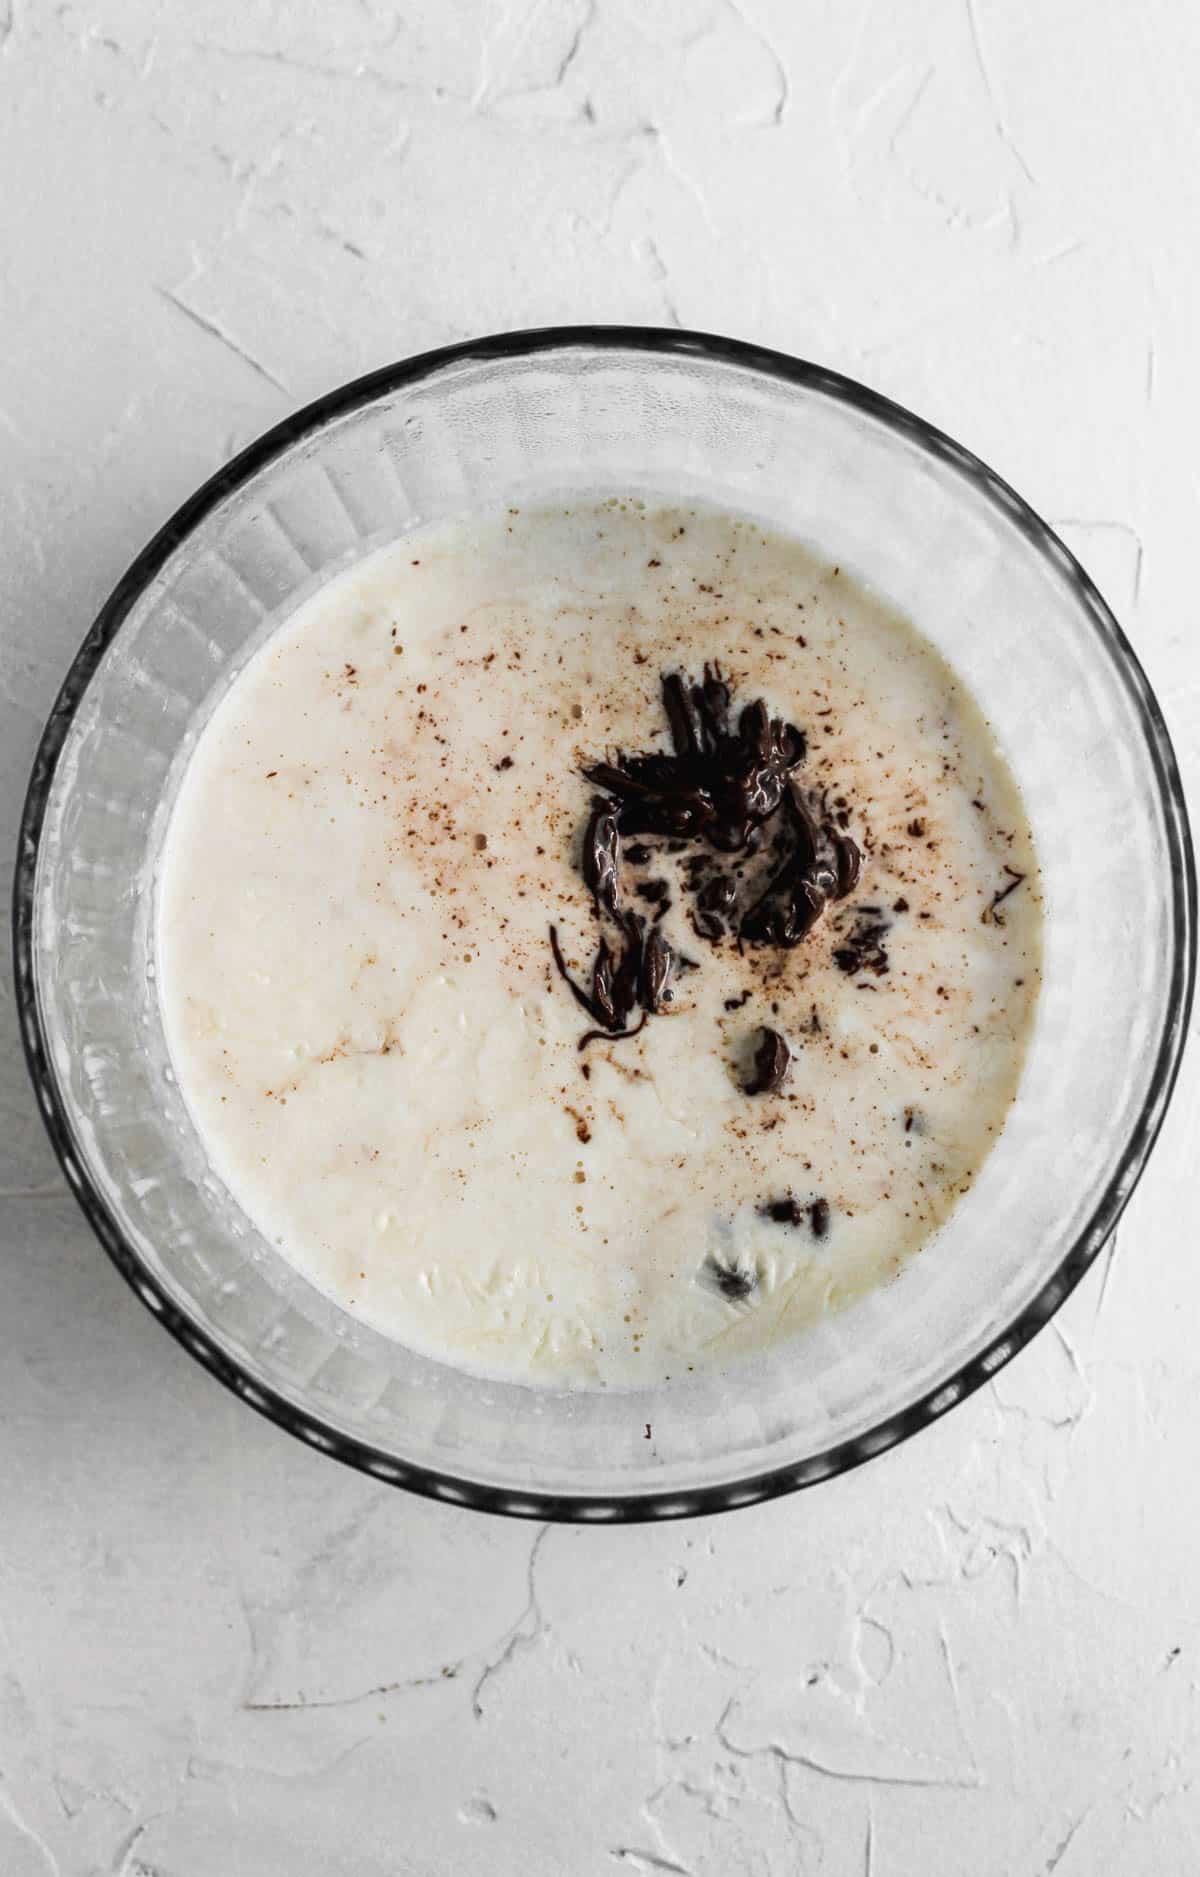 Warm heavy cream on top of chocolate chips in a glass bowl.